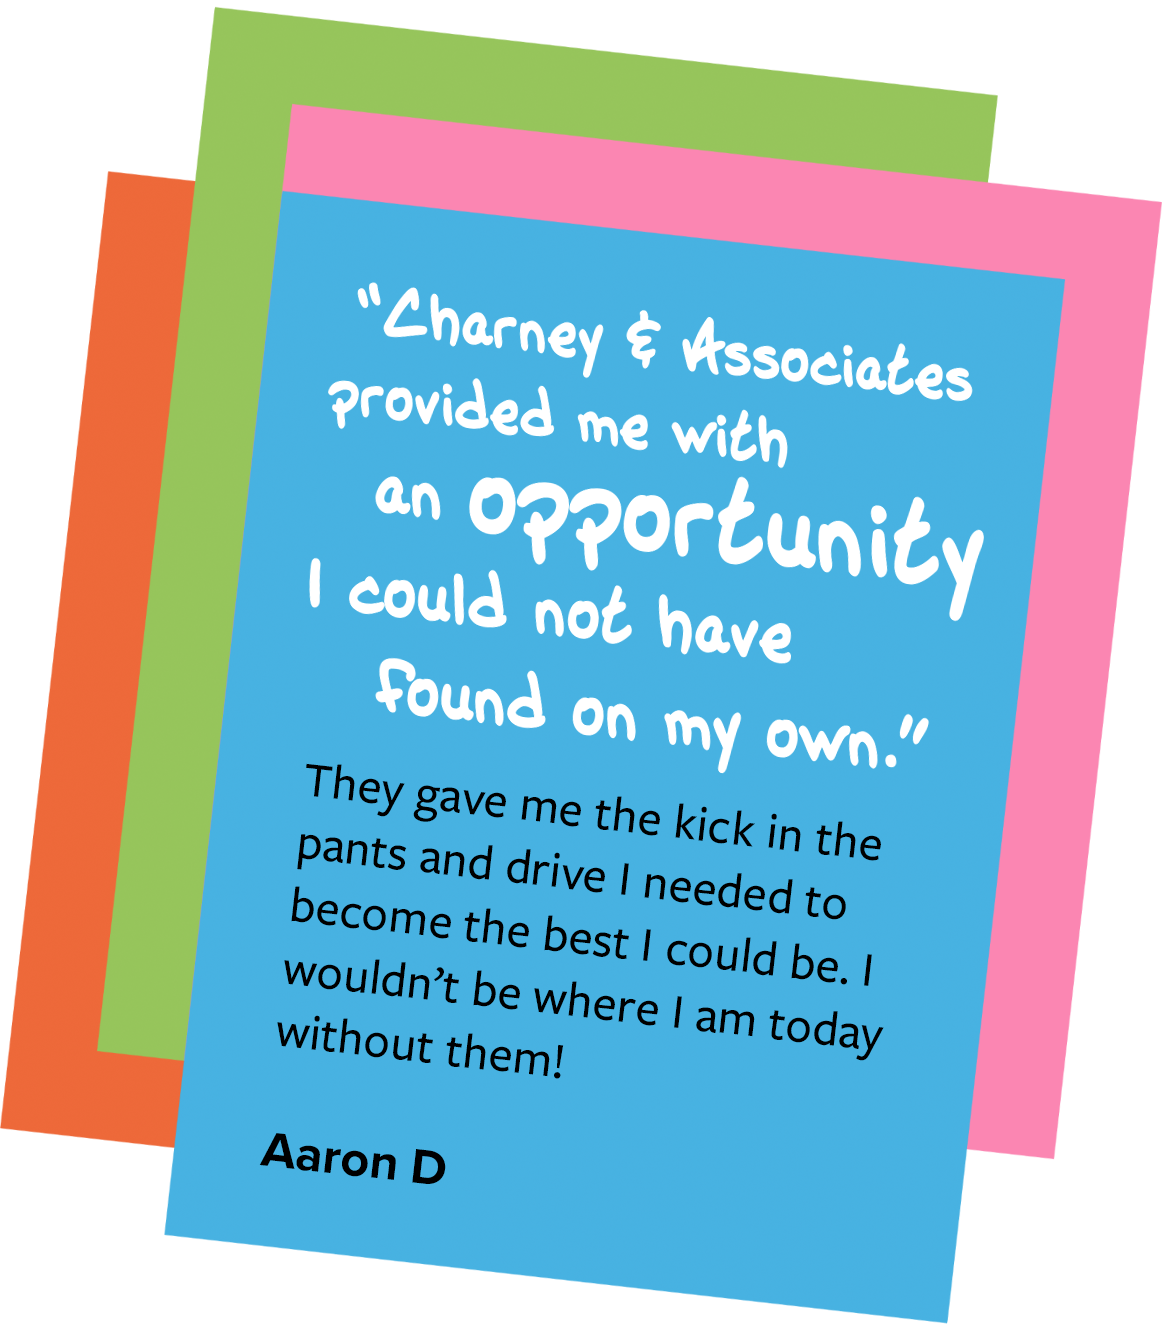 Charney & Associates provided me with an opportunity I could not have found on my own.